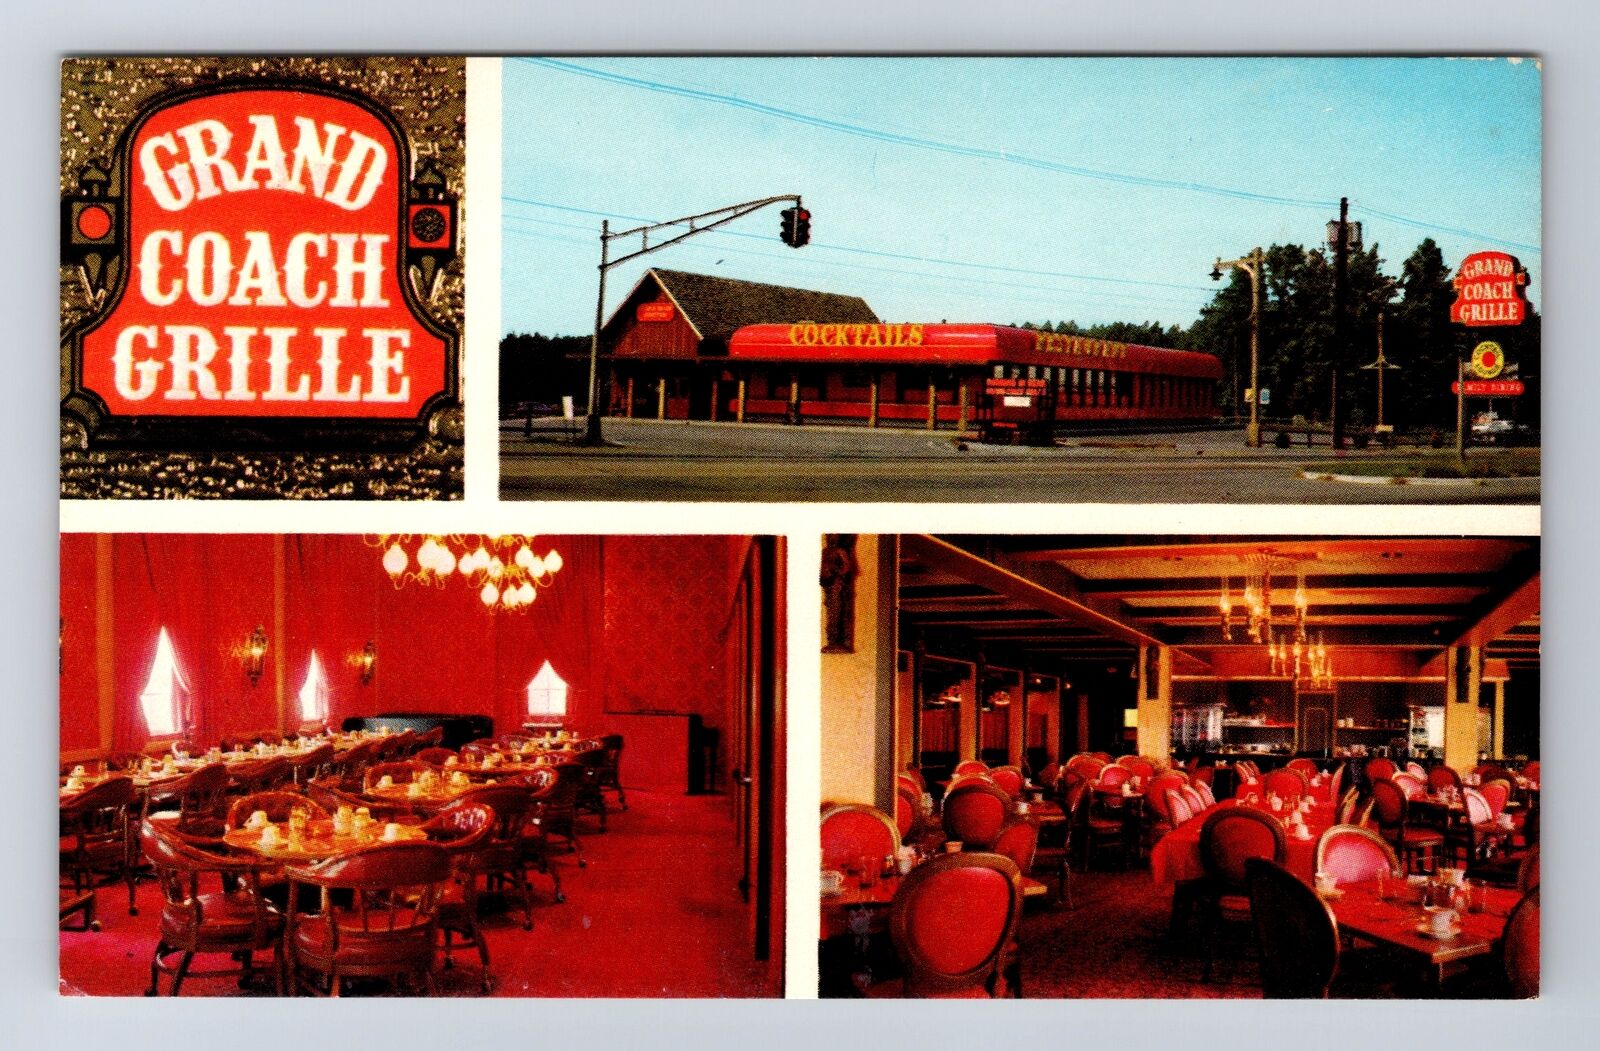 Maple Shade NJ-New Jersey, Grand Coach Grille Dining Souvenir Vintage Postcard